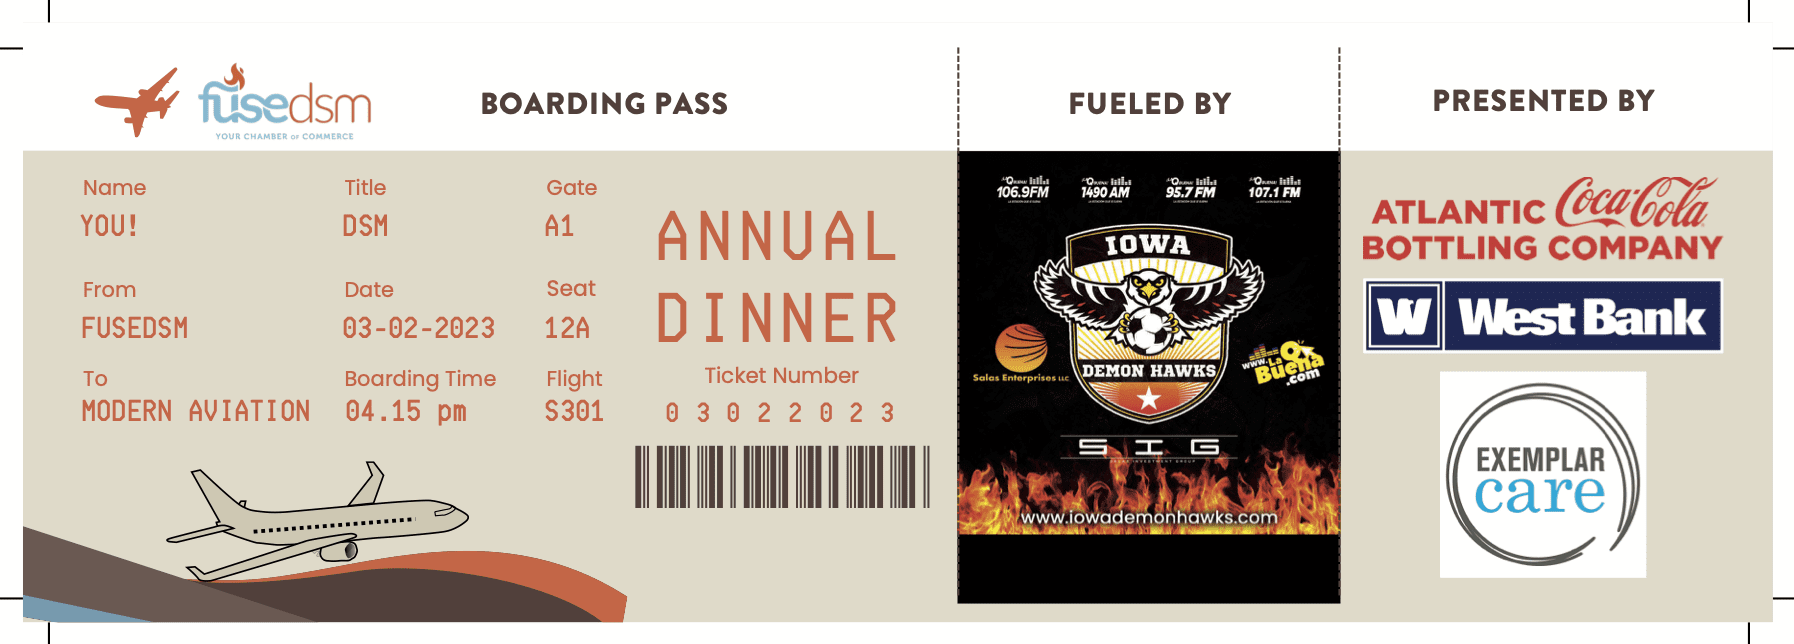 FuseDSM Boarding Pass Annual Dinner Tickets 2023